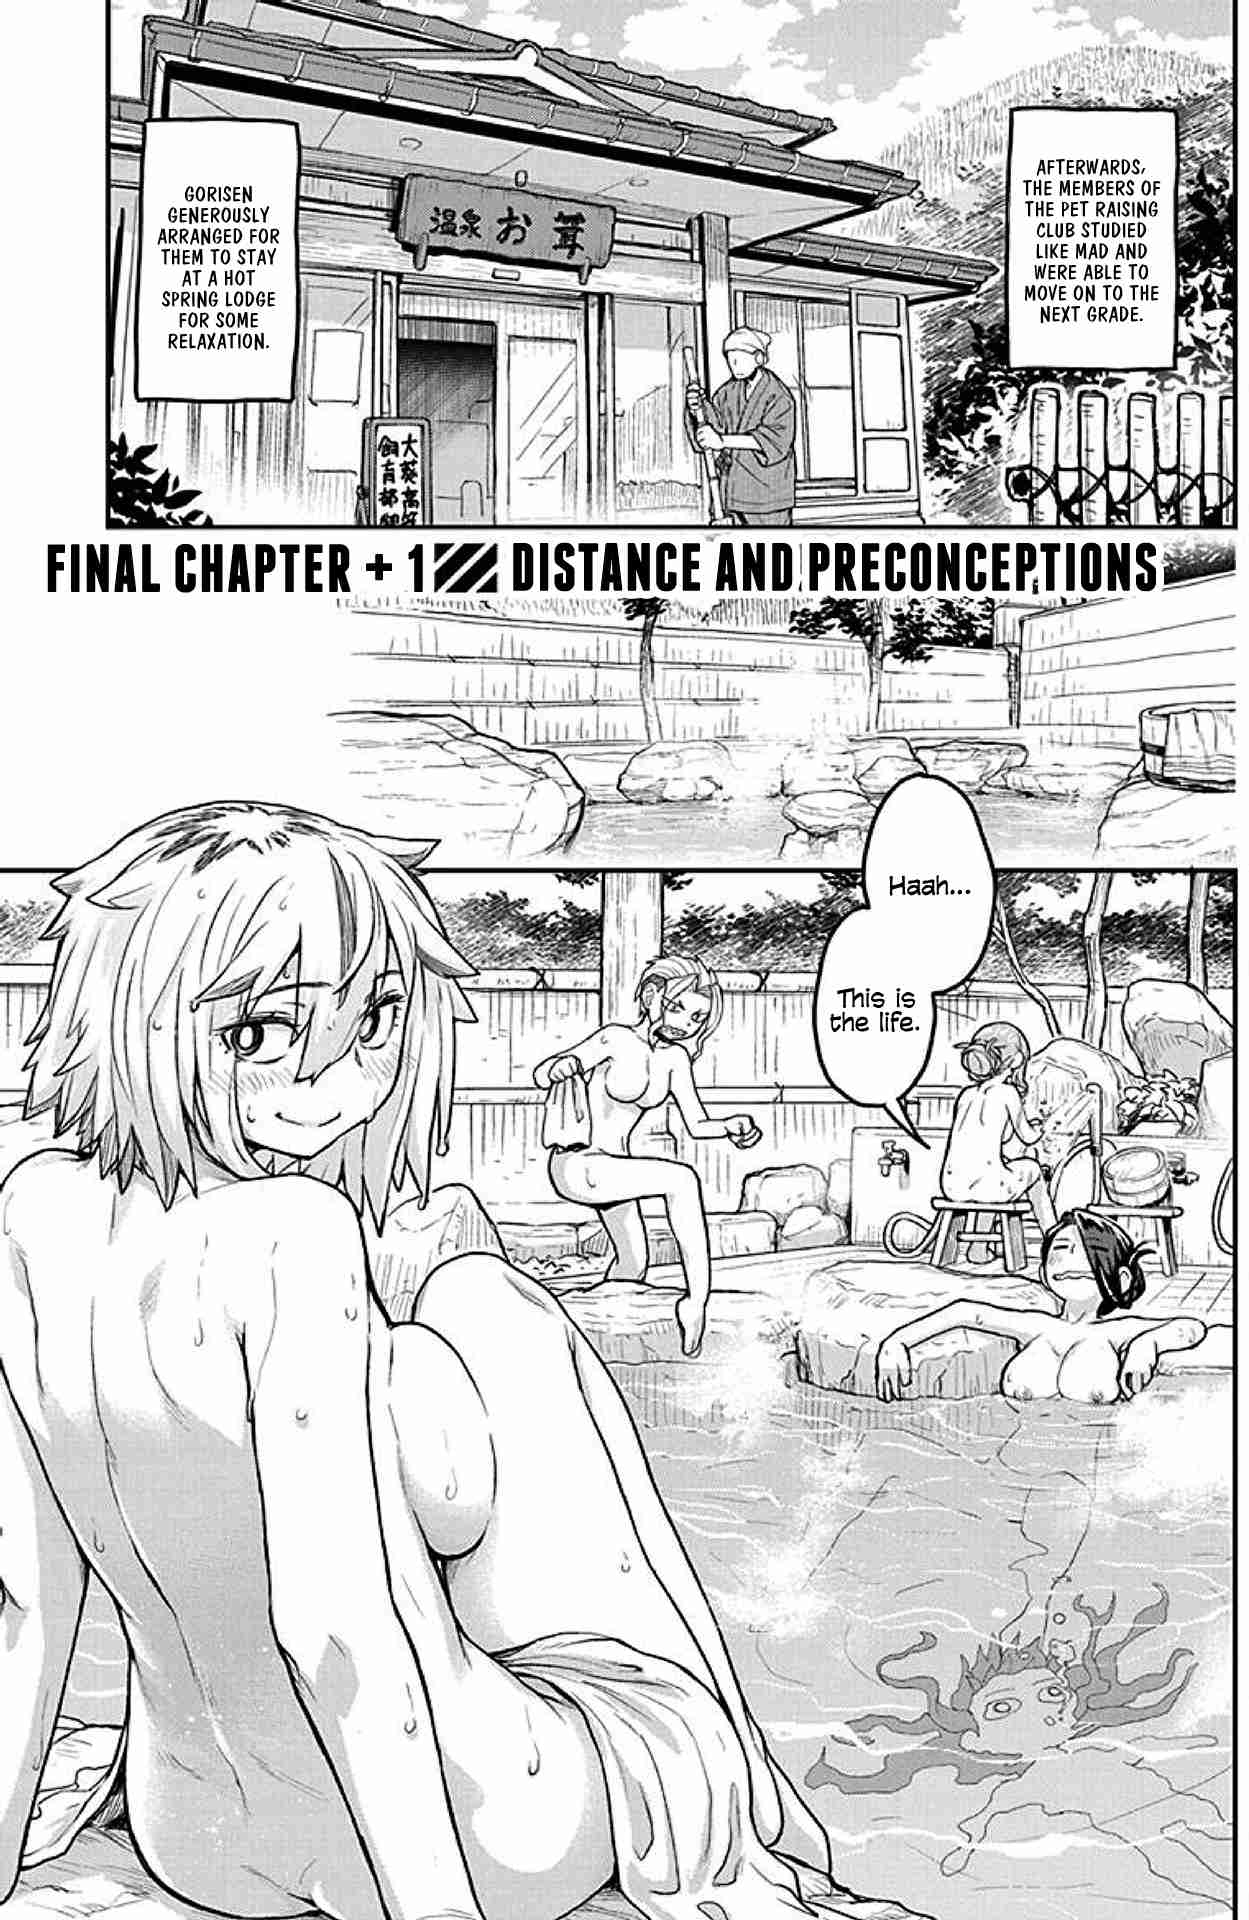 Torako! Don't Break Everything! Vol. 2 Ch. 21 Distance And Preconceptions